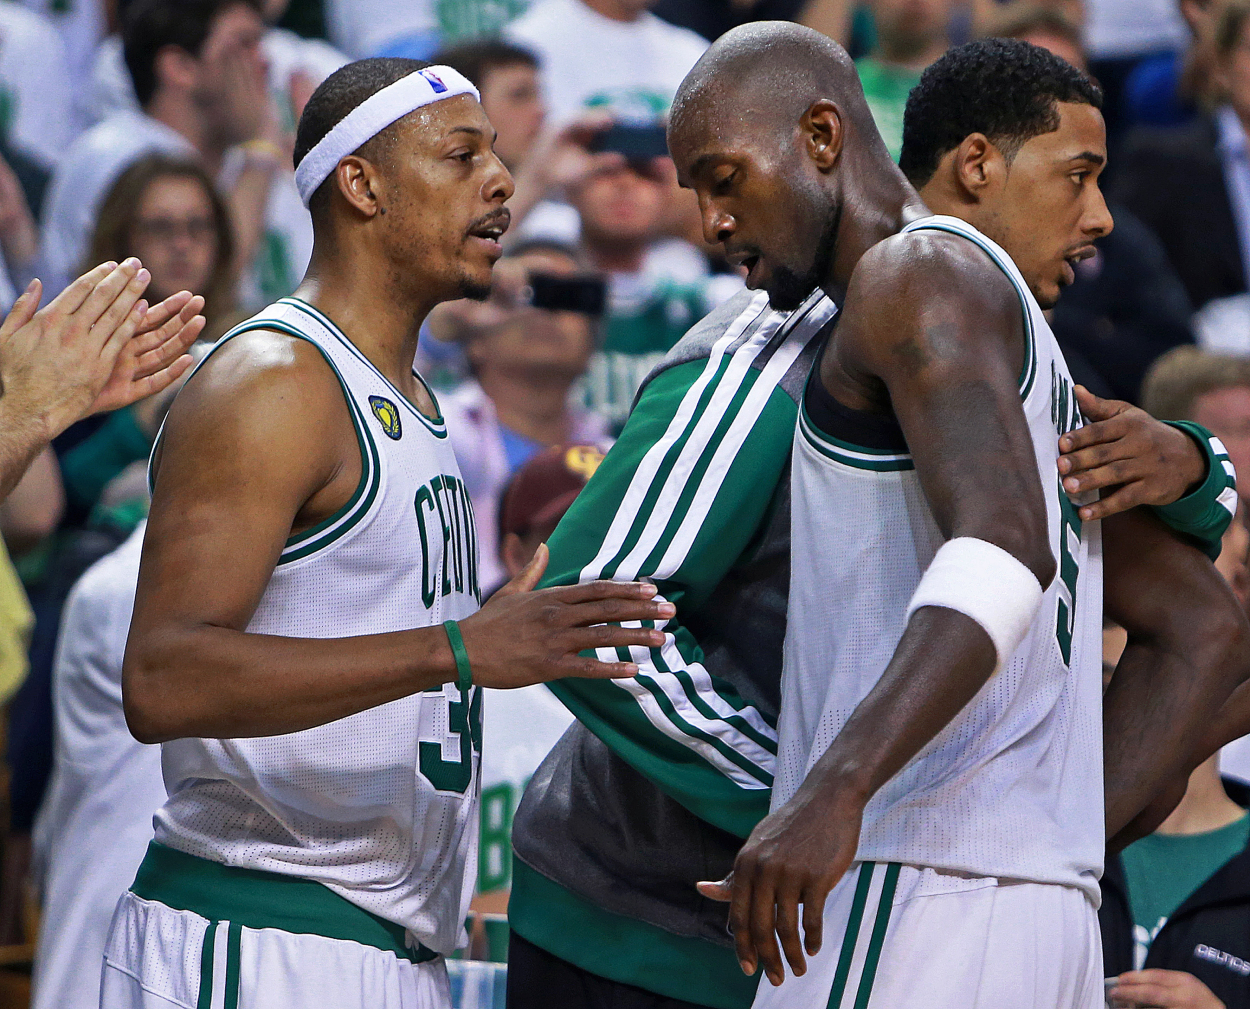 Paul Pierce and Kevin Garnett talk at the end of the game against the New York Knicks.